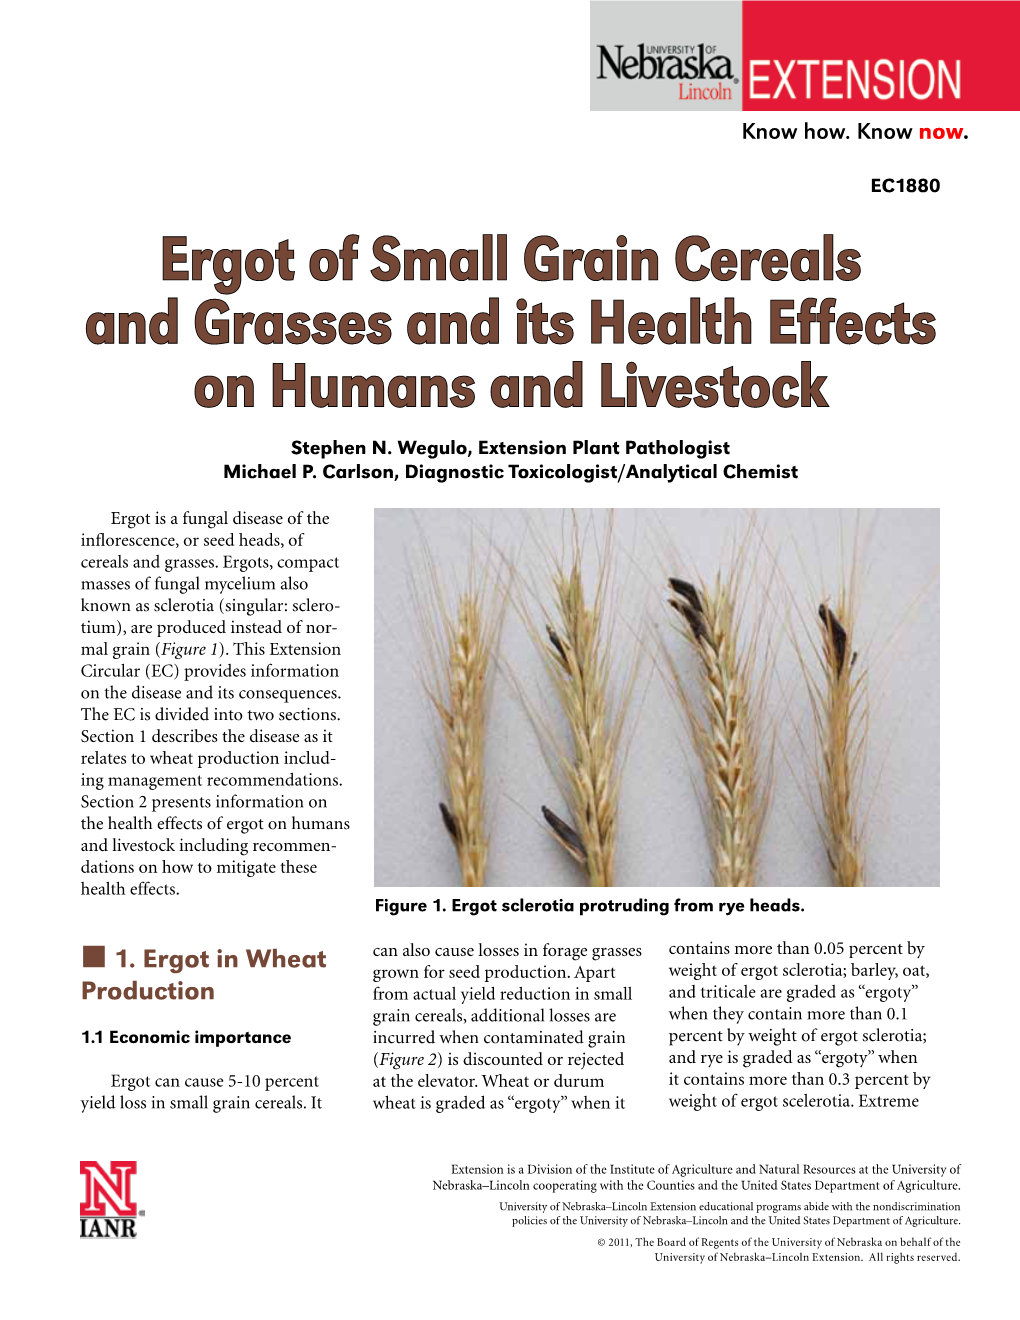 Ergot of Small Grain Cereals and Grasses and Its Health Effects on Humans and Livestock Stephen N